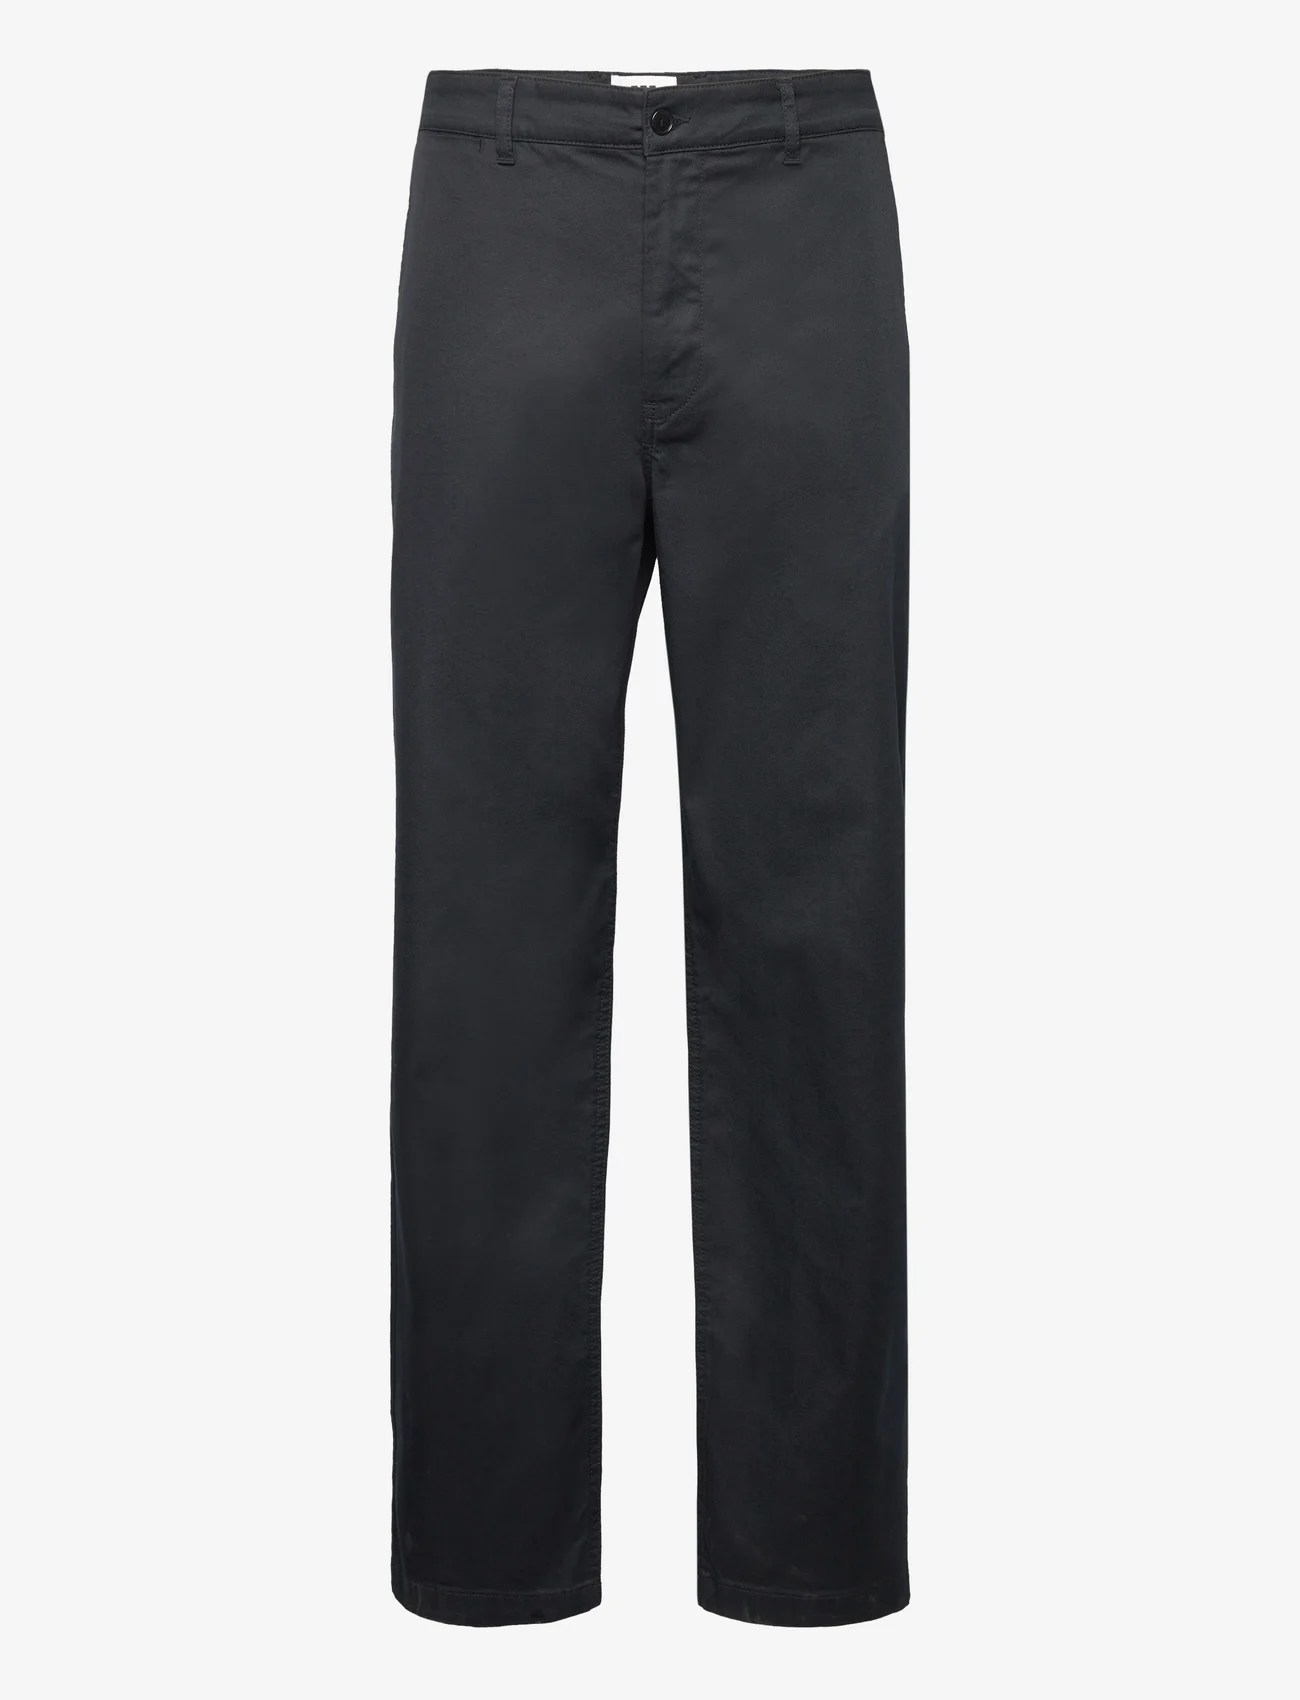 Double A by Wood Wood - Silas classic trousers - chinos - black - 0